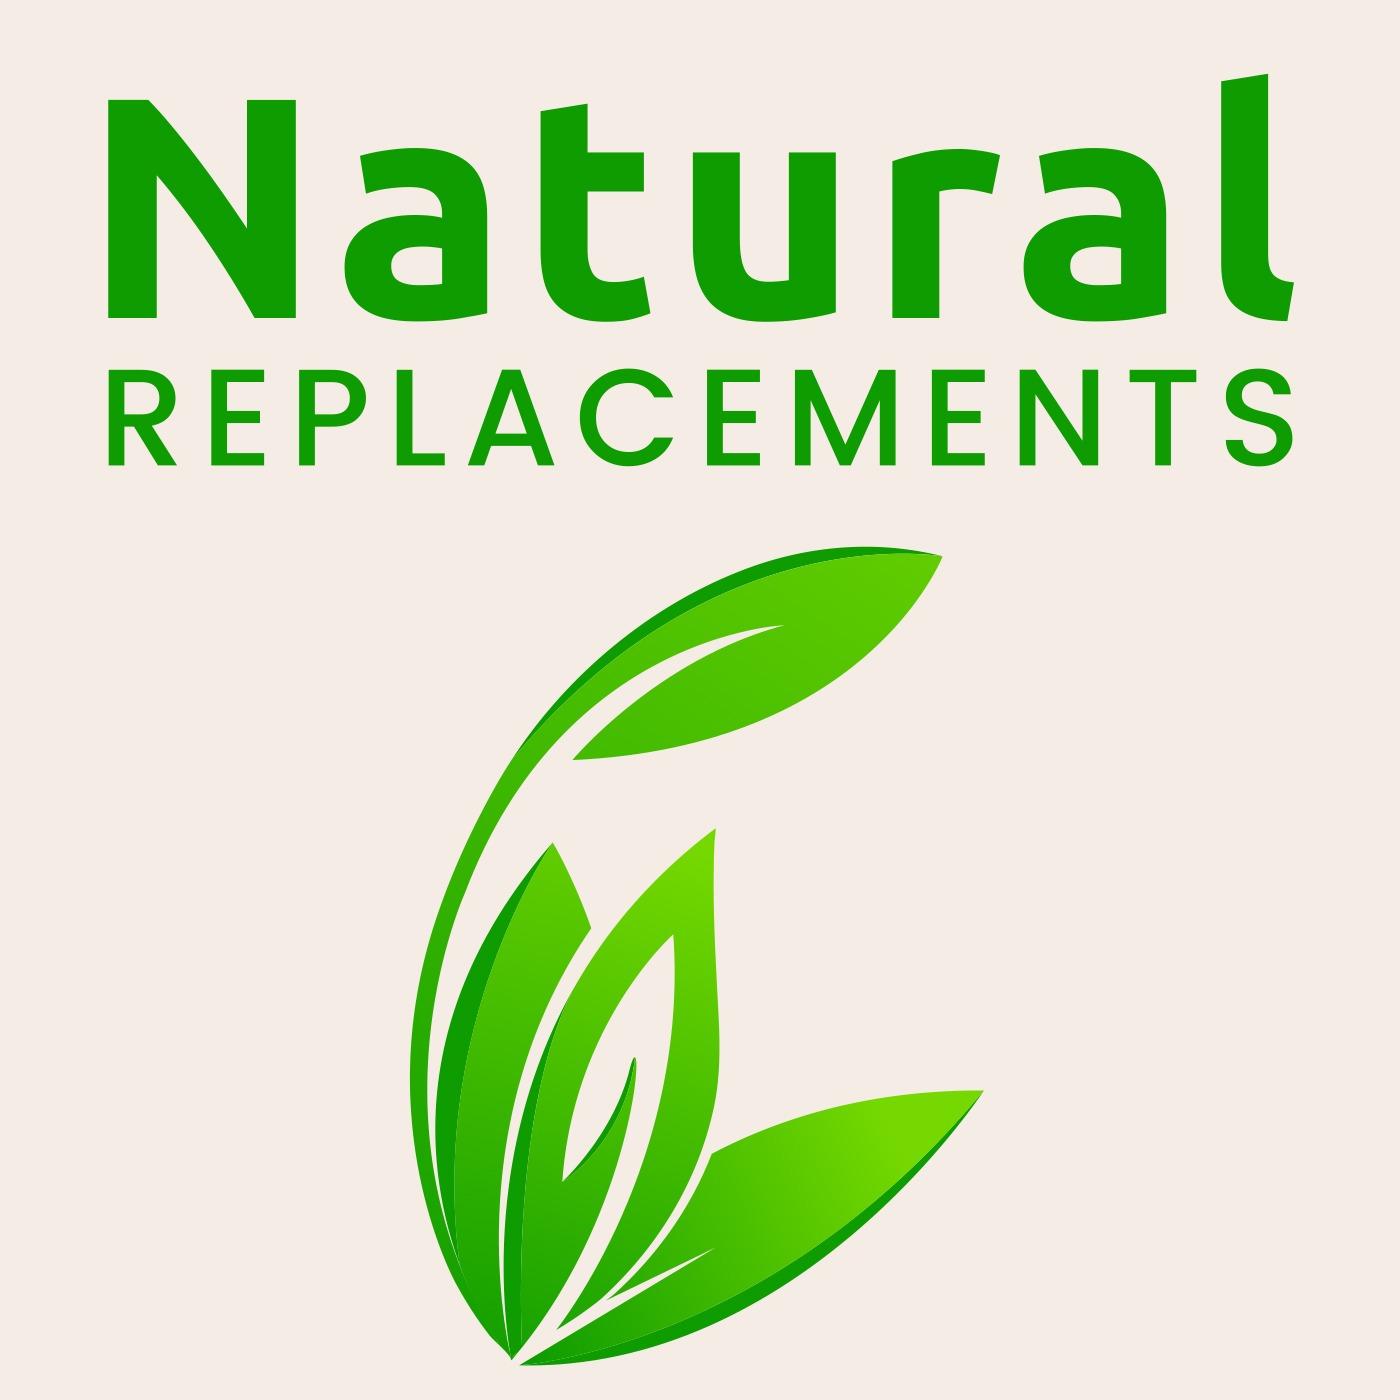 Natural Replacements: Learn